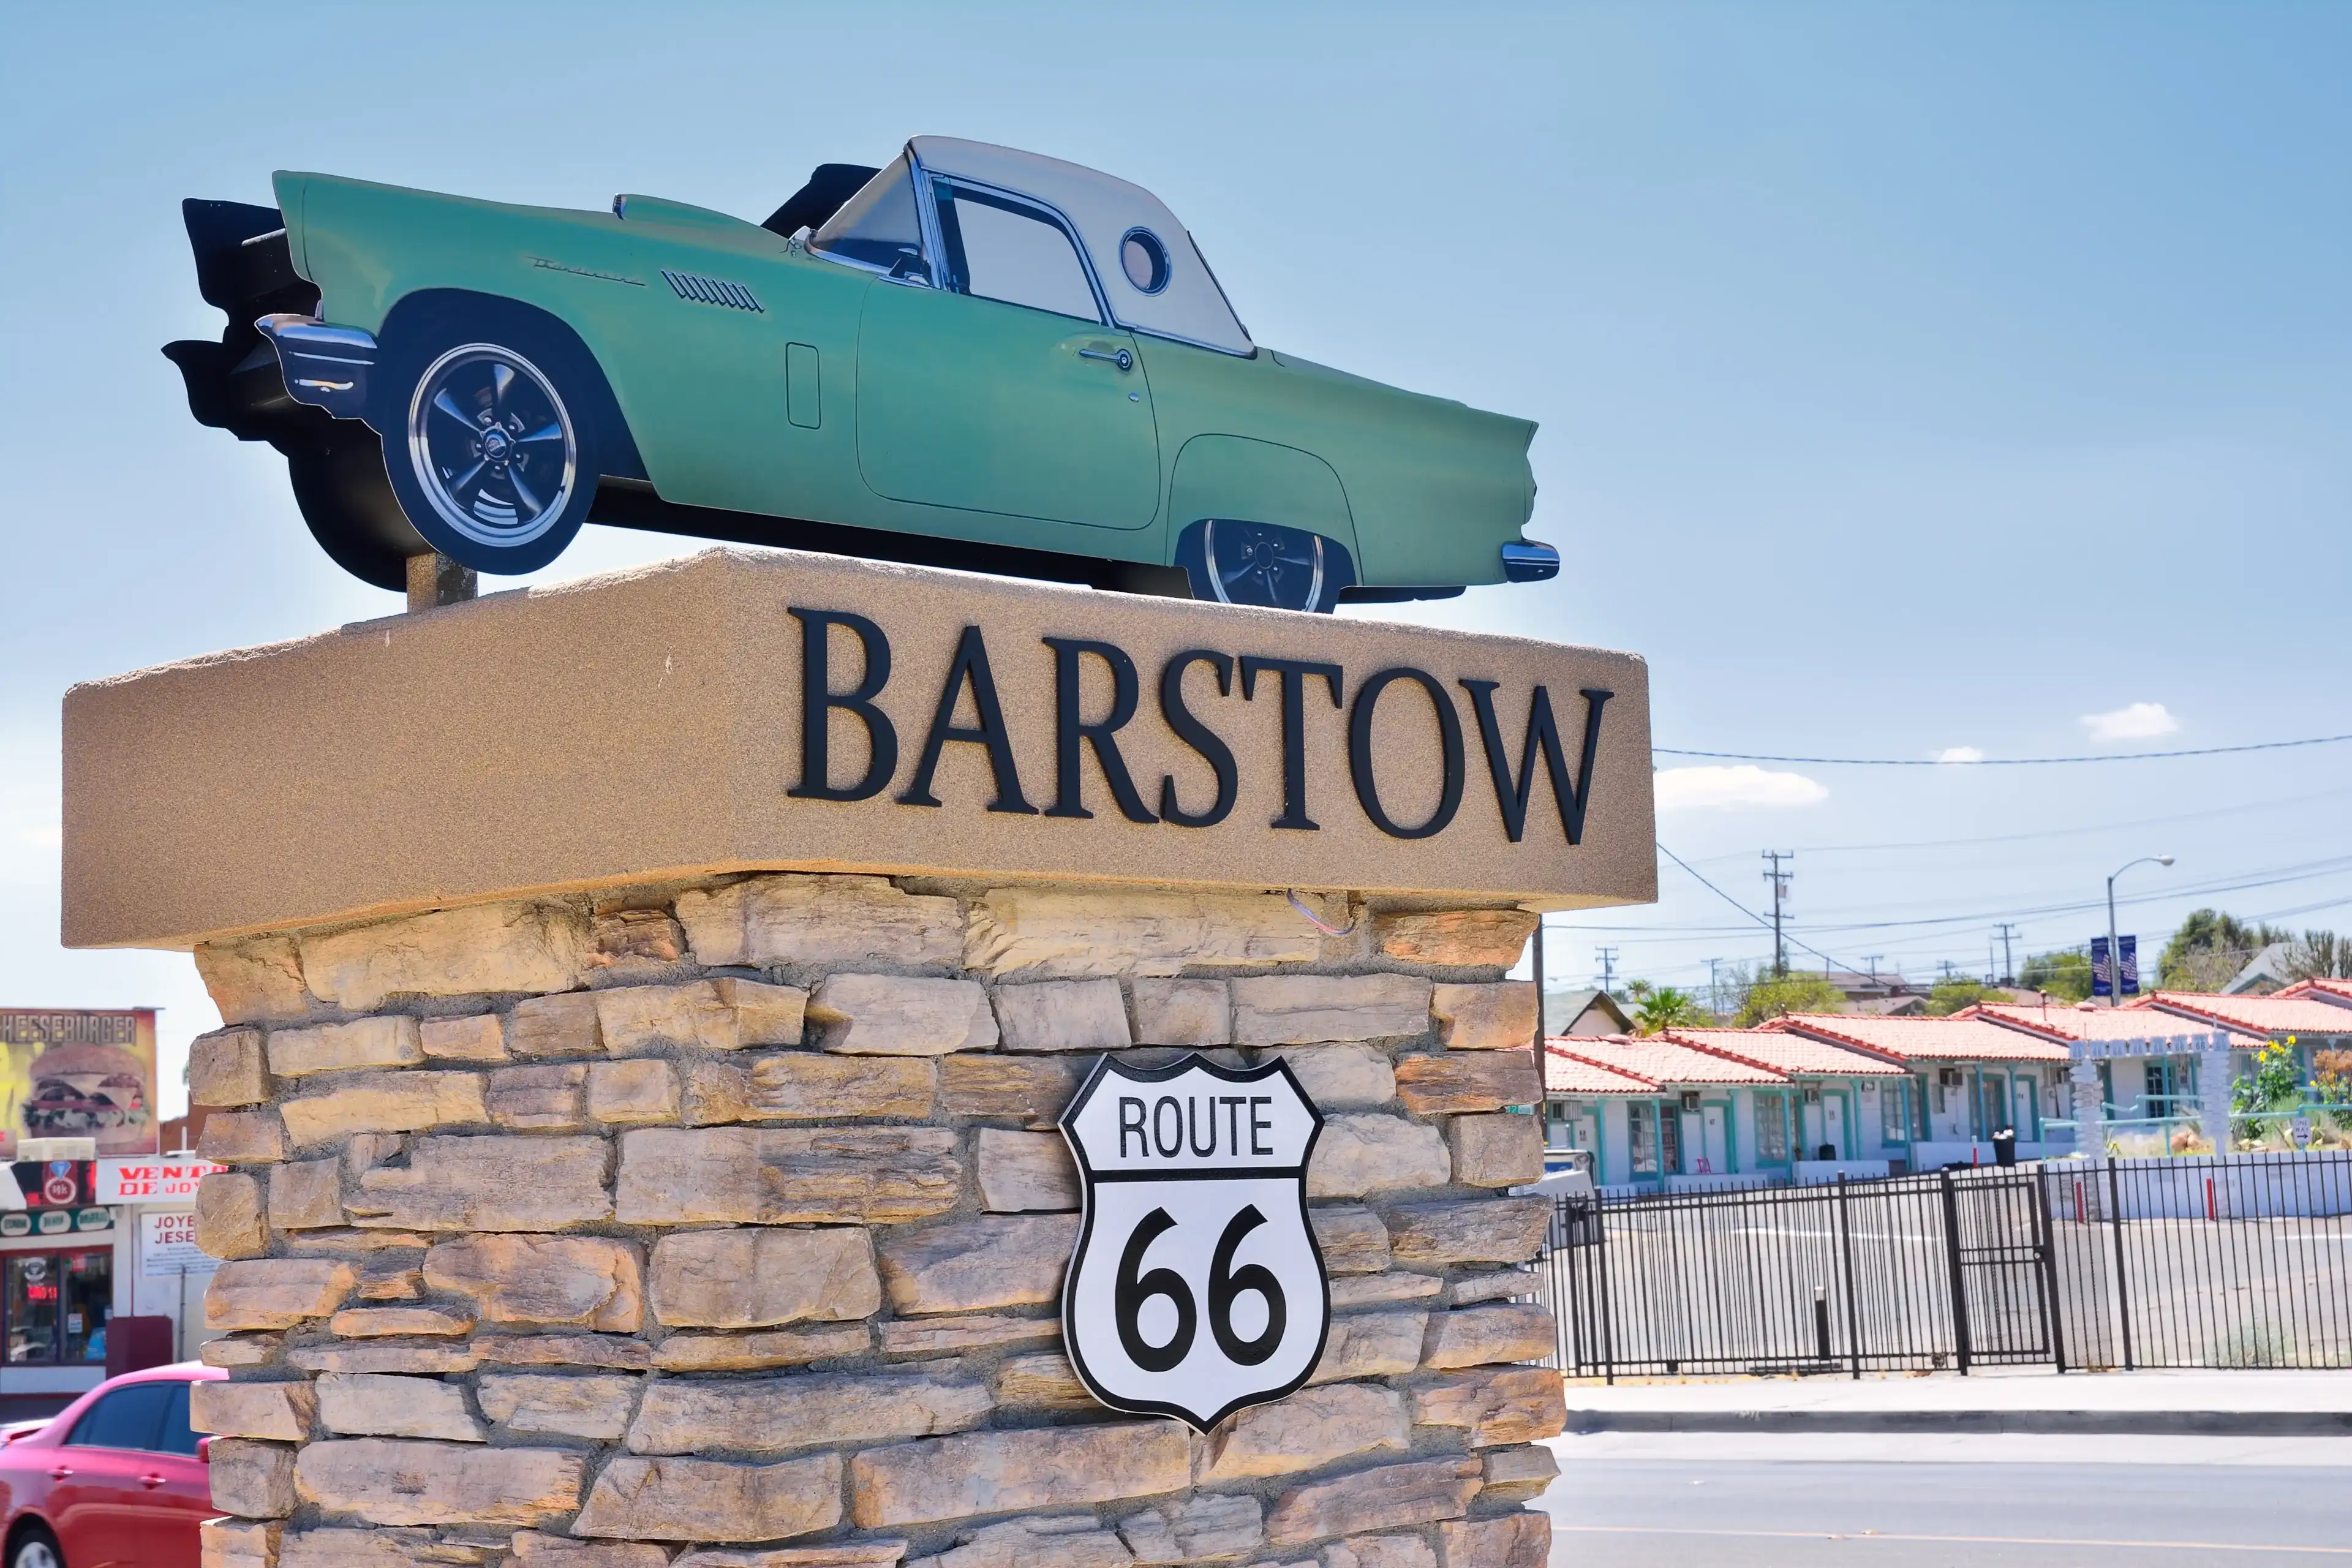 Best Barstow hotels. Cheap hotels in Barstow, California, United States